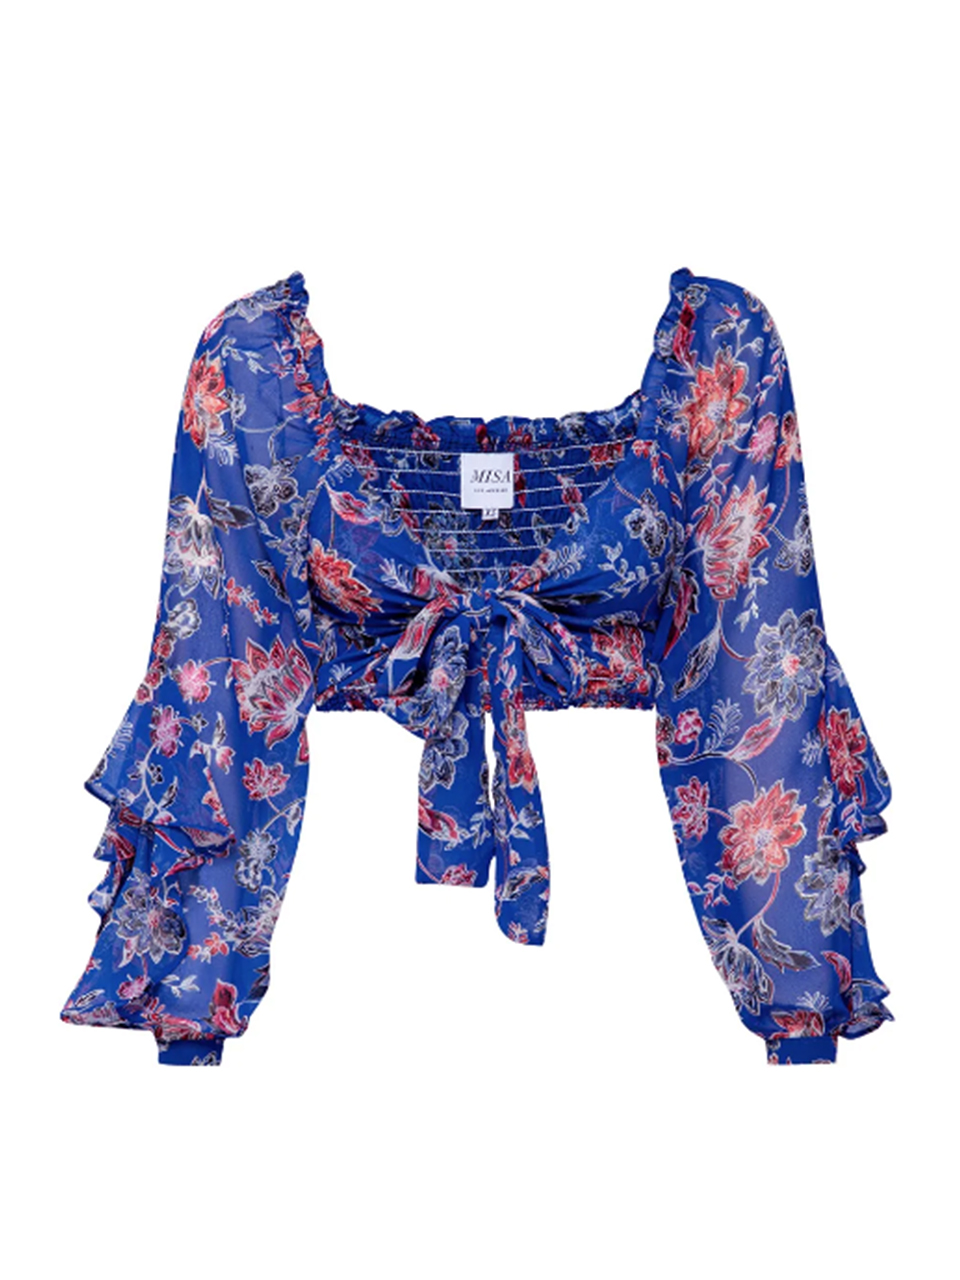 MISA Los Angeles Ancora Top in Sireneuse Floral Product Shot 